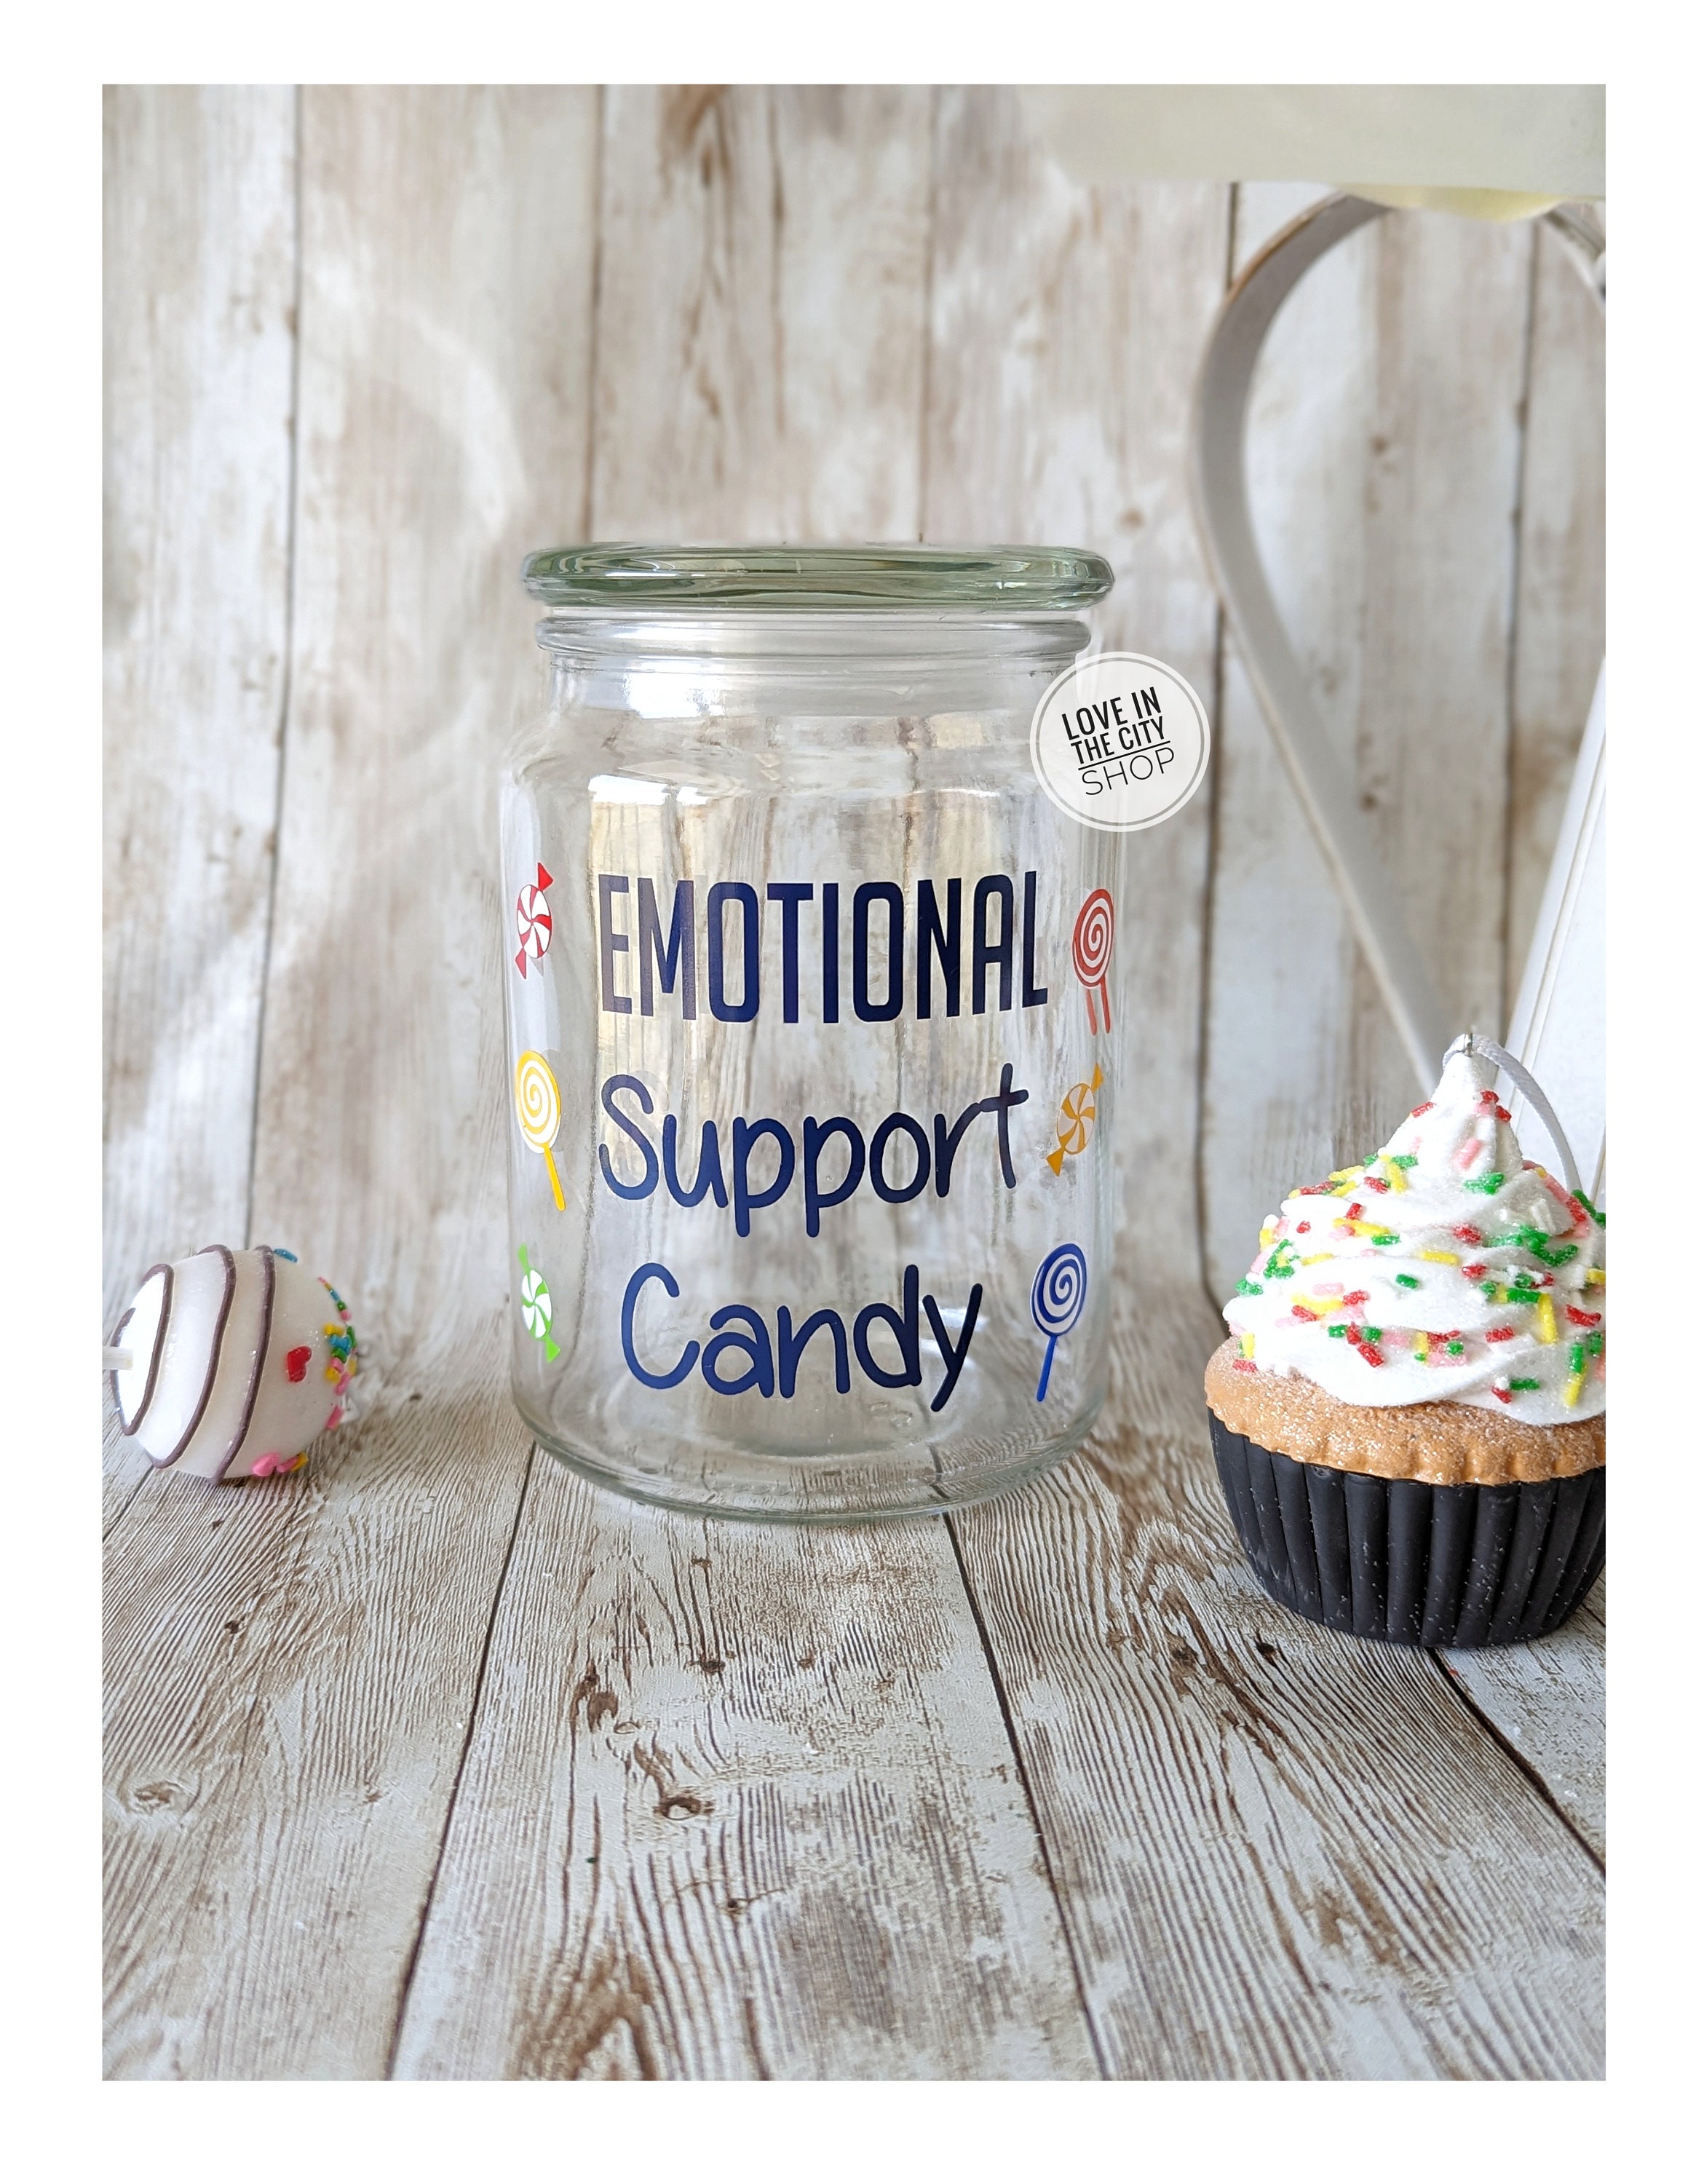 Funny gifts candy jars unique coworker gift ideas | Zazzle